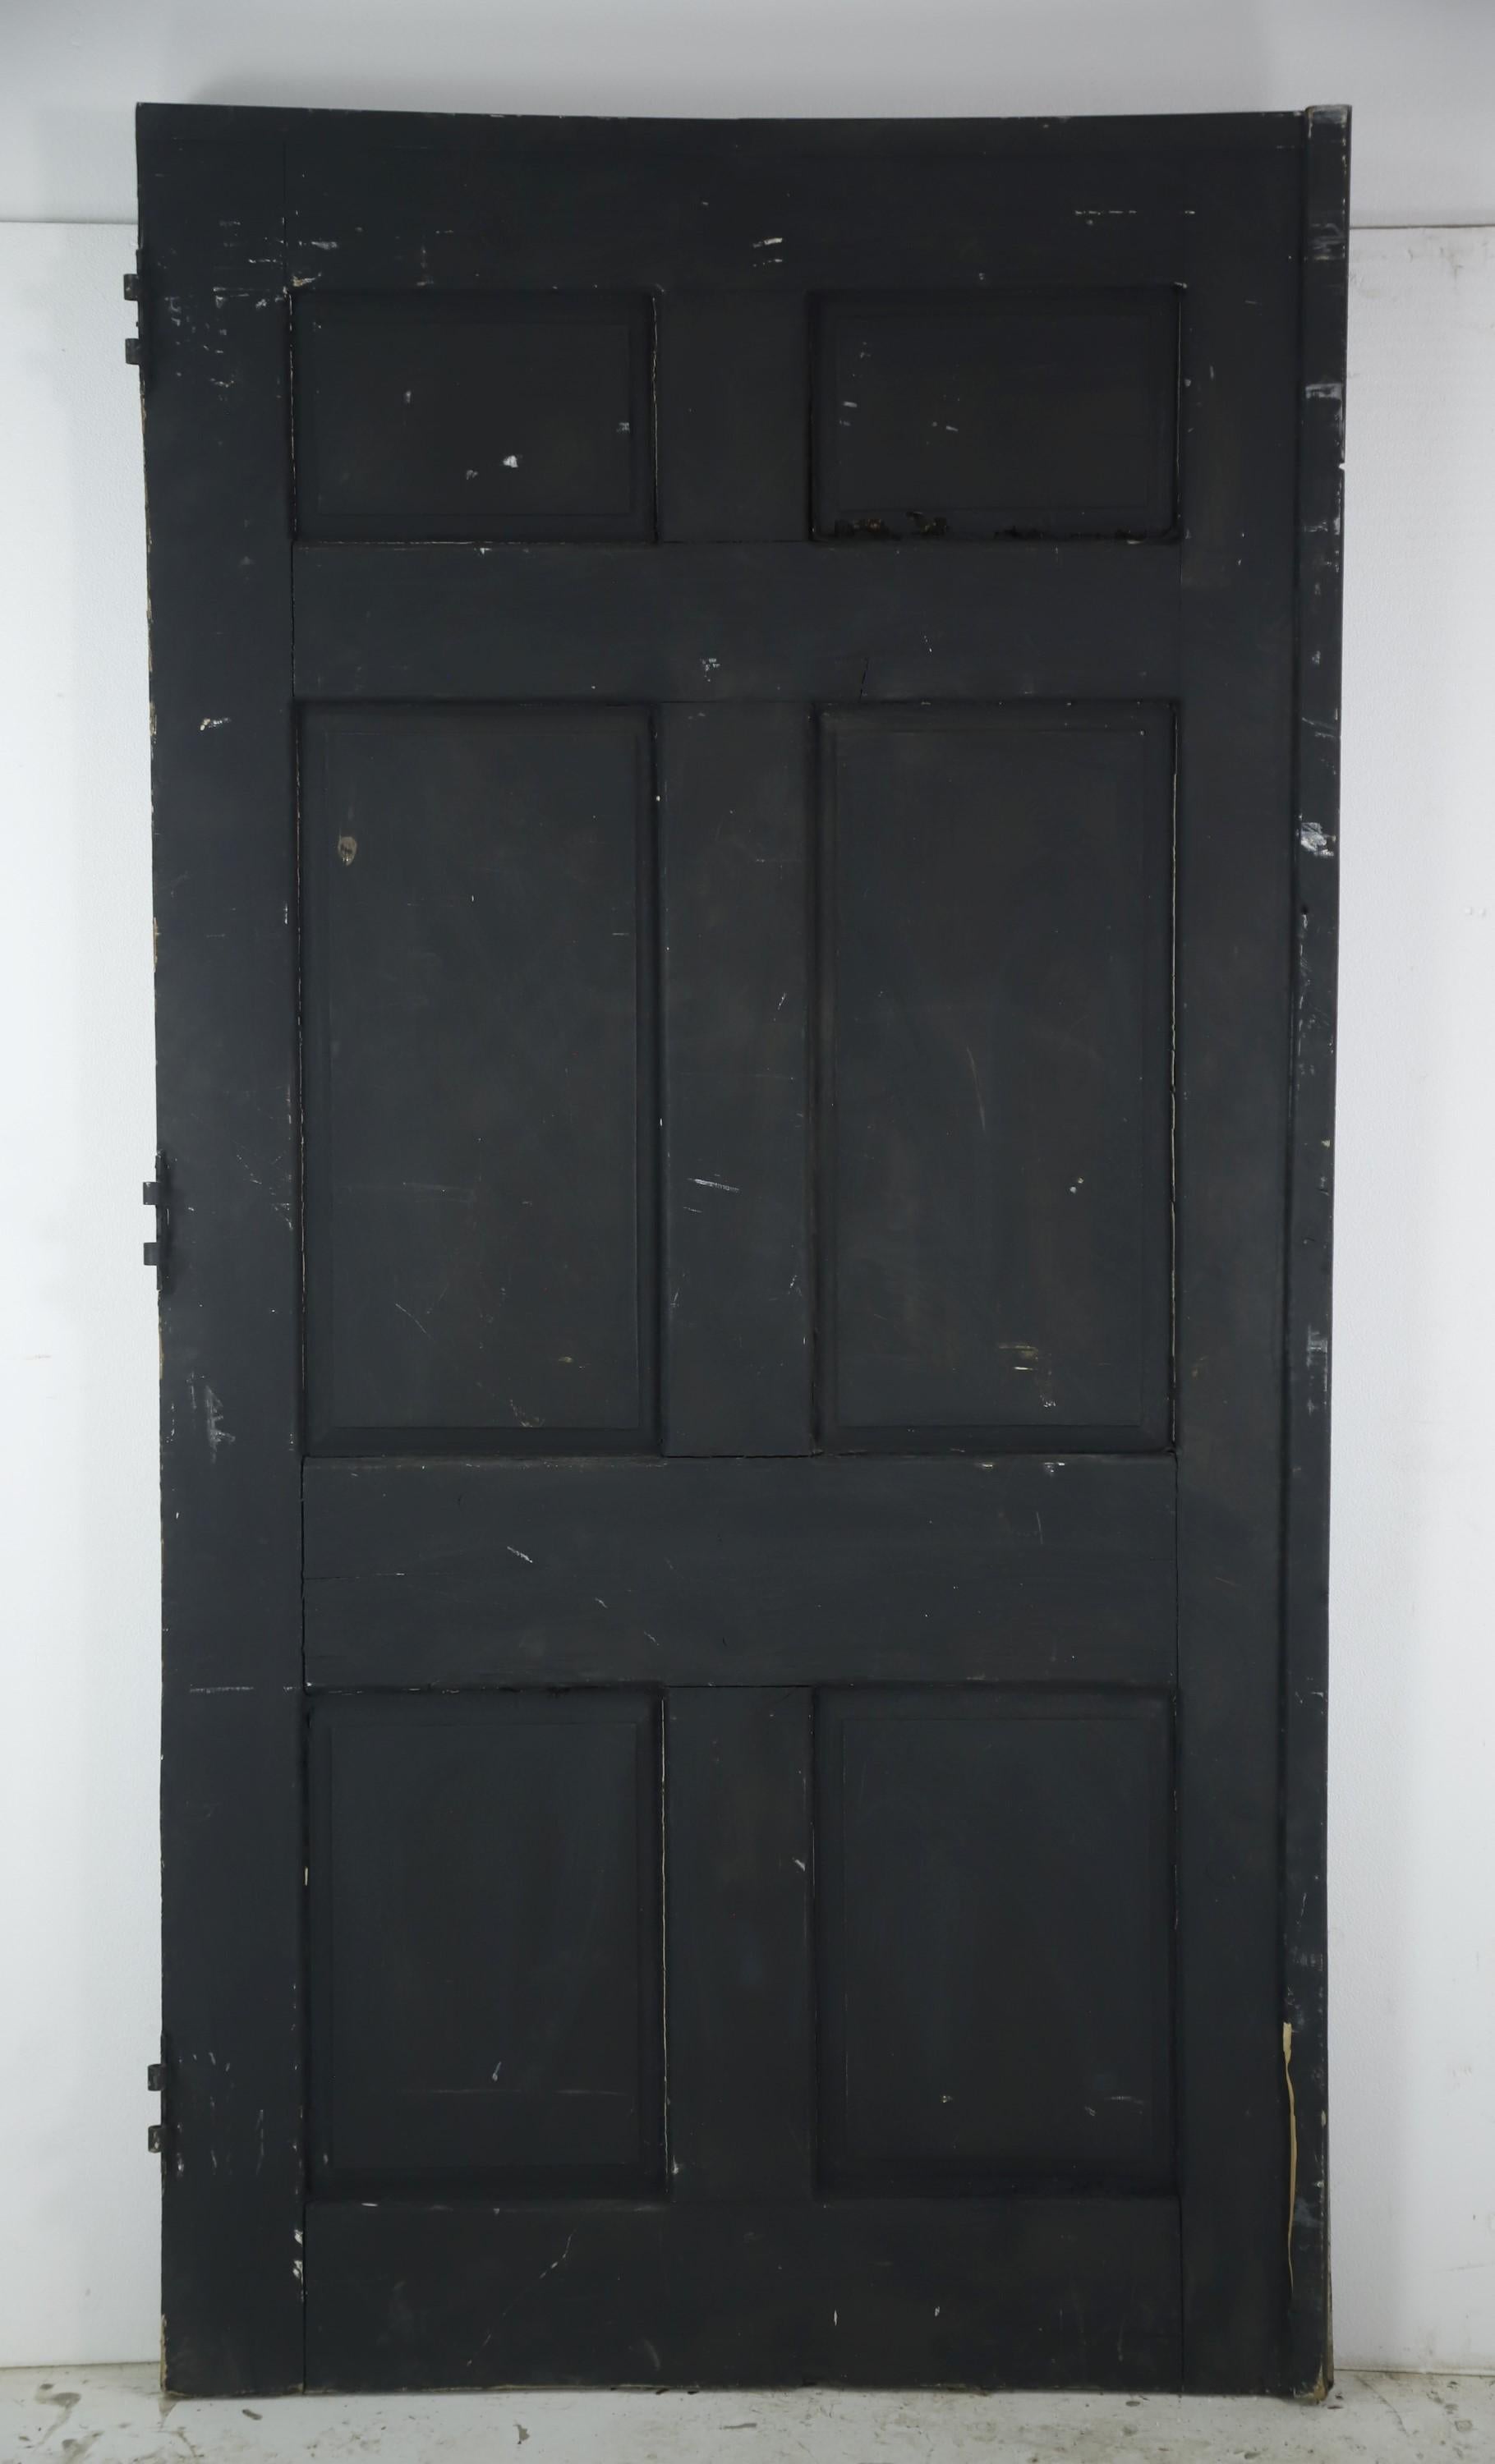 Early 20th Century extra wide black wood door featuring six panels and some of the original hardware, which has been painted over. Overall in good condition, with typical surface wear. Please note, this item is located in our Scranton, PA